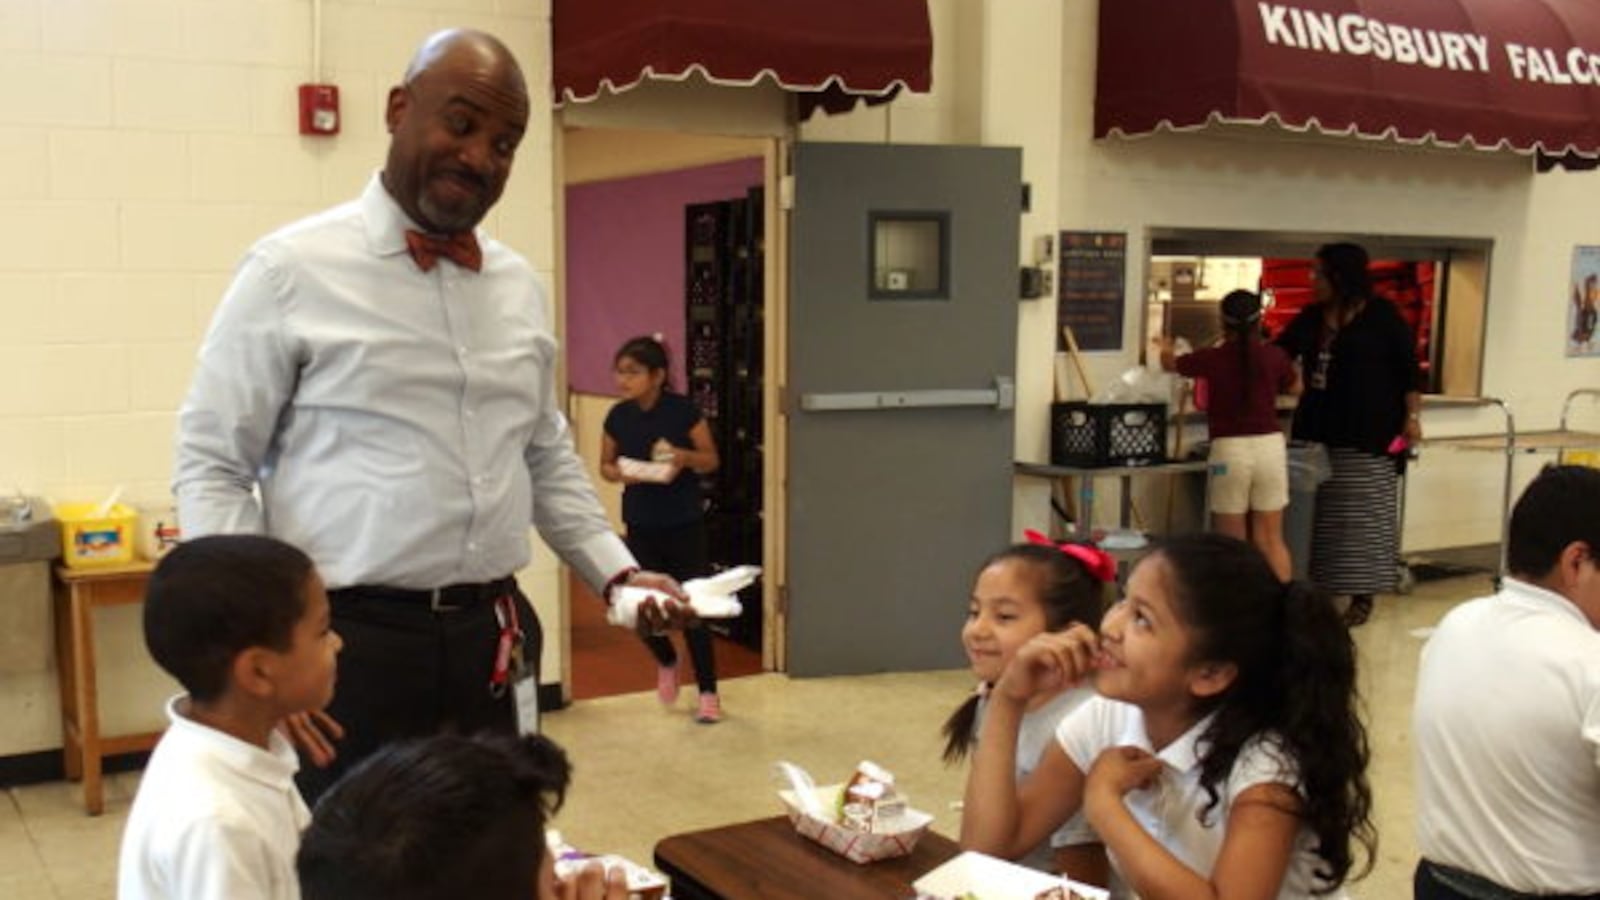 Principal Wynn Earle greets students at Kingsbury Elementary School during lunch most days.